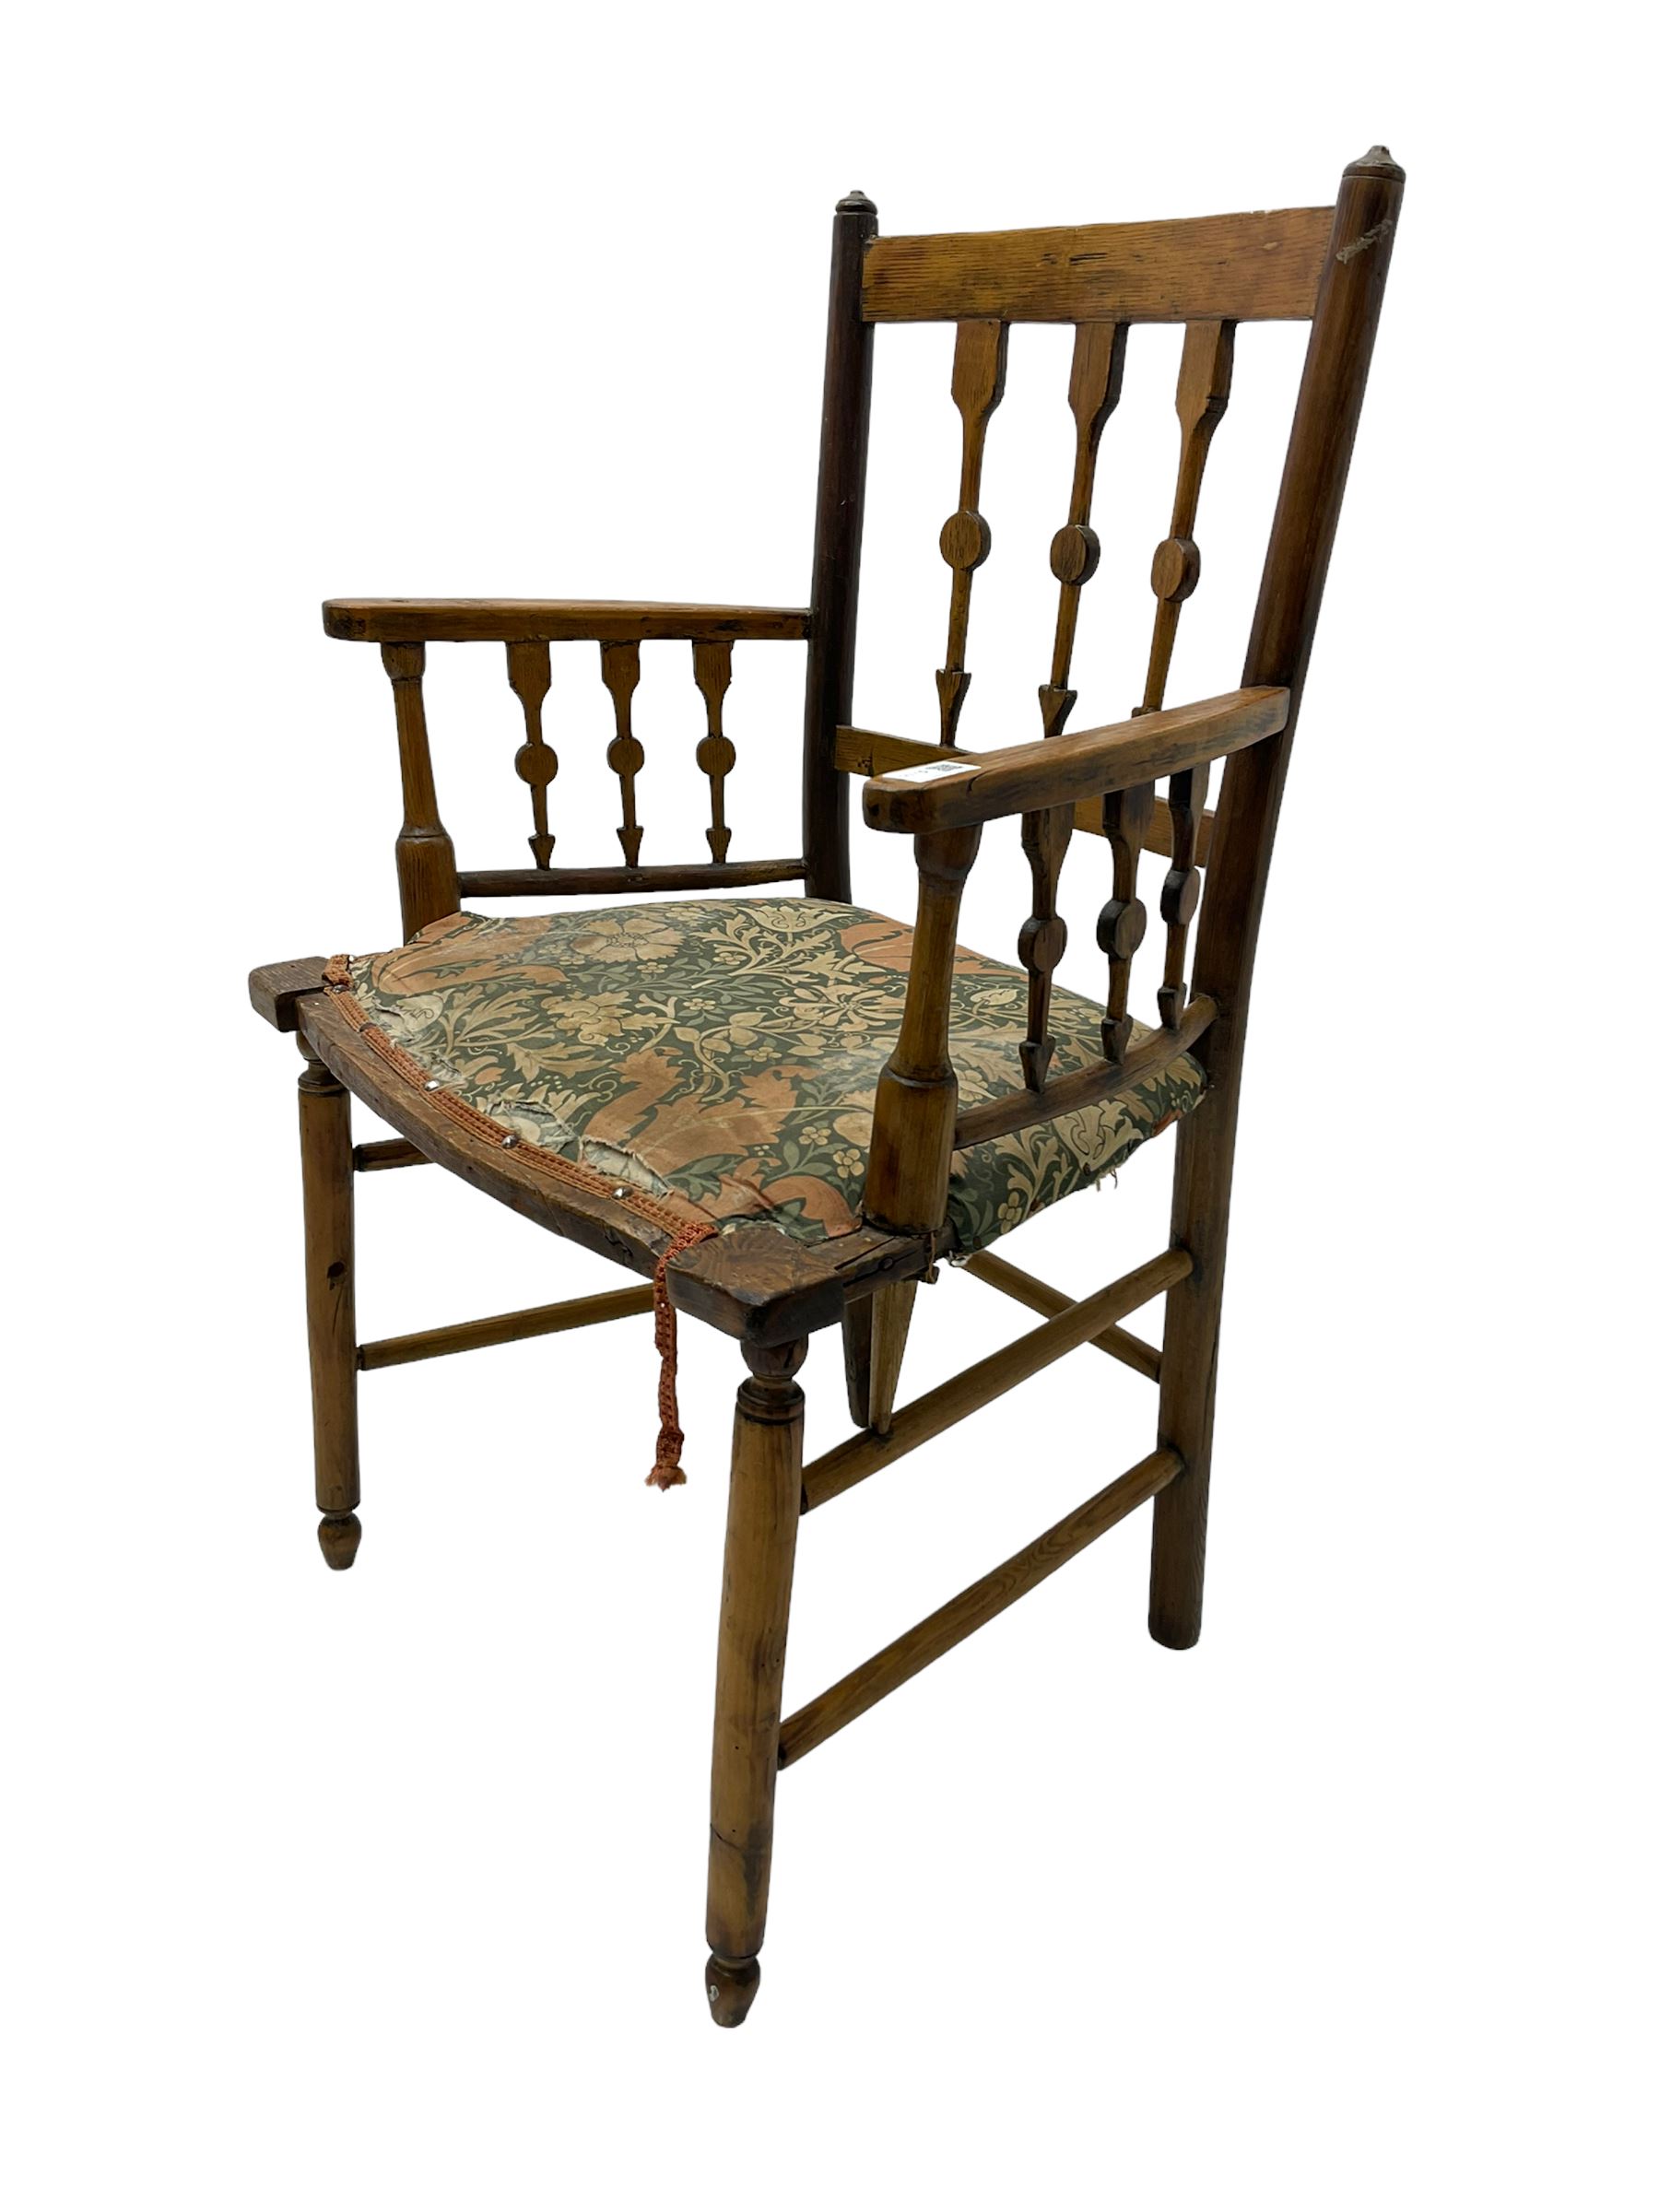 19th century ash and beech Sussex type elbow chair - Image 3 of 6